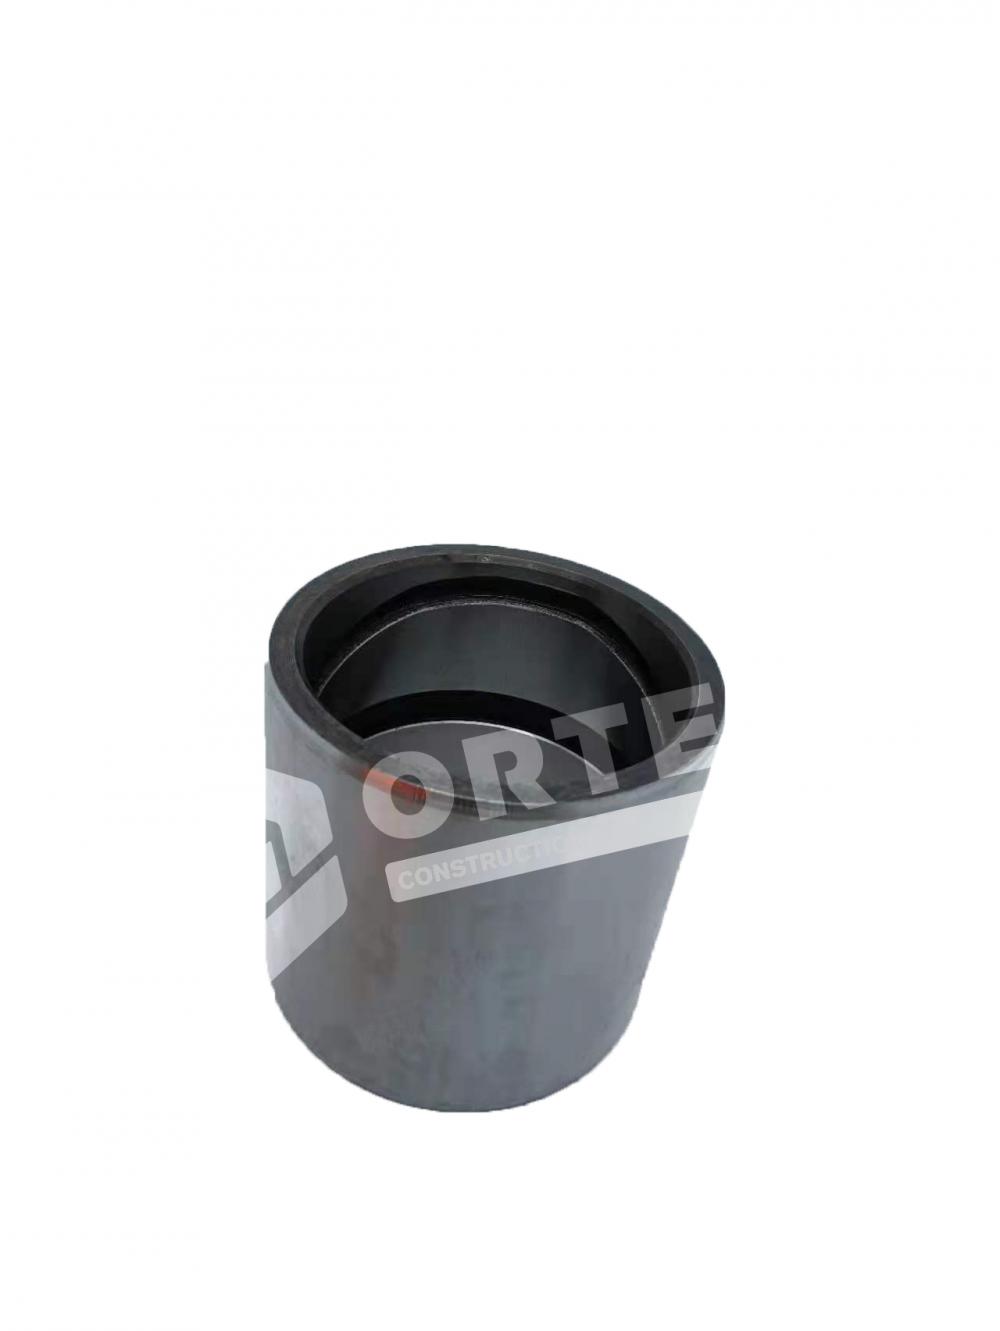 4043000026 Bushing Suitable for SDLG LG953